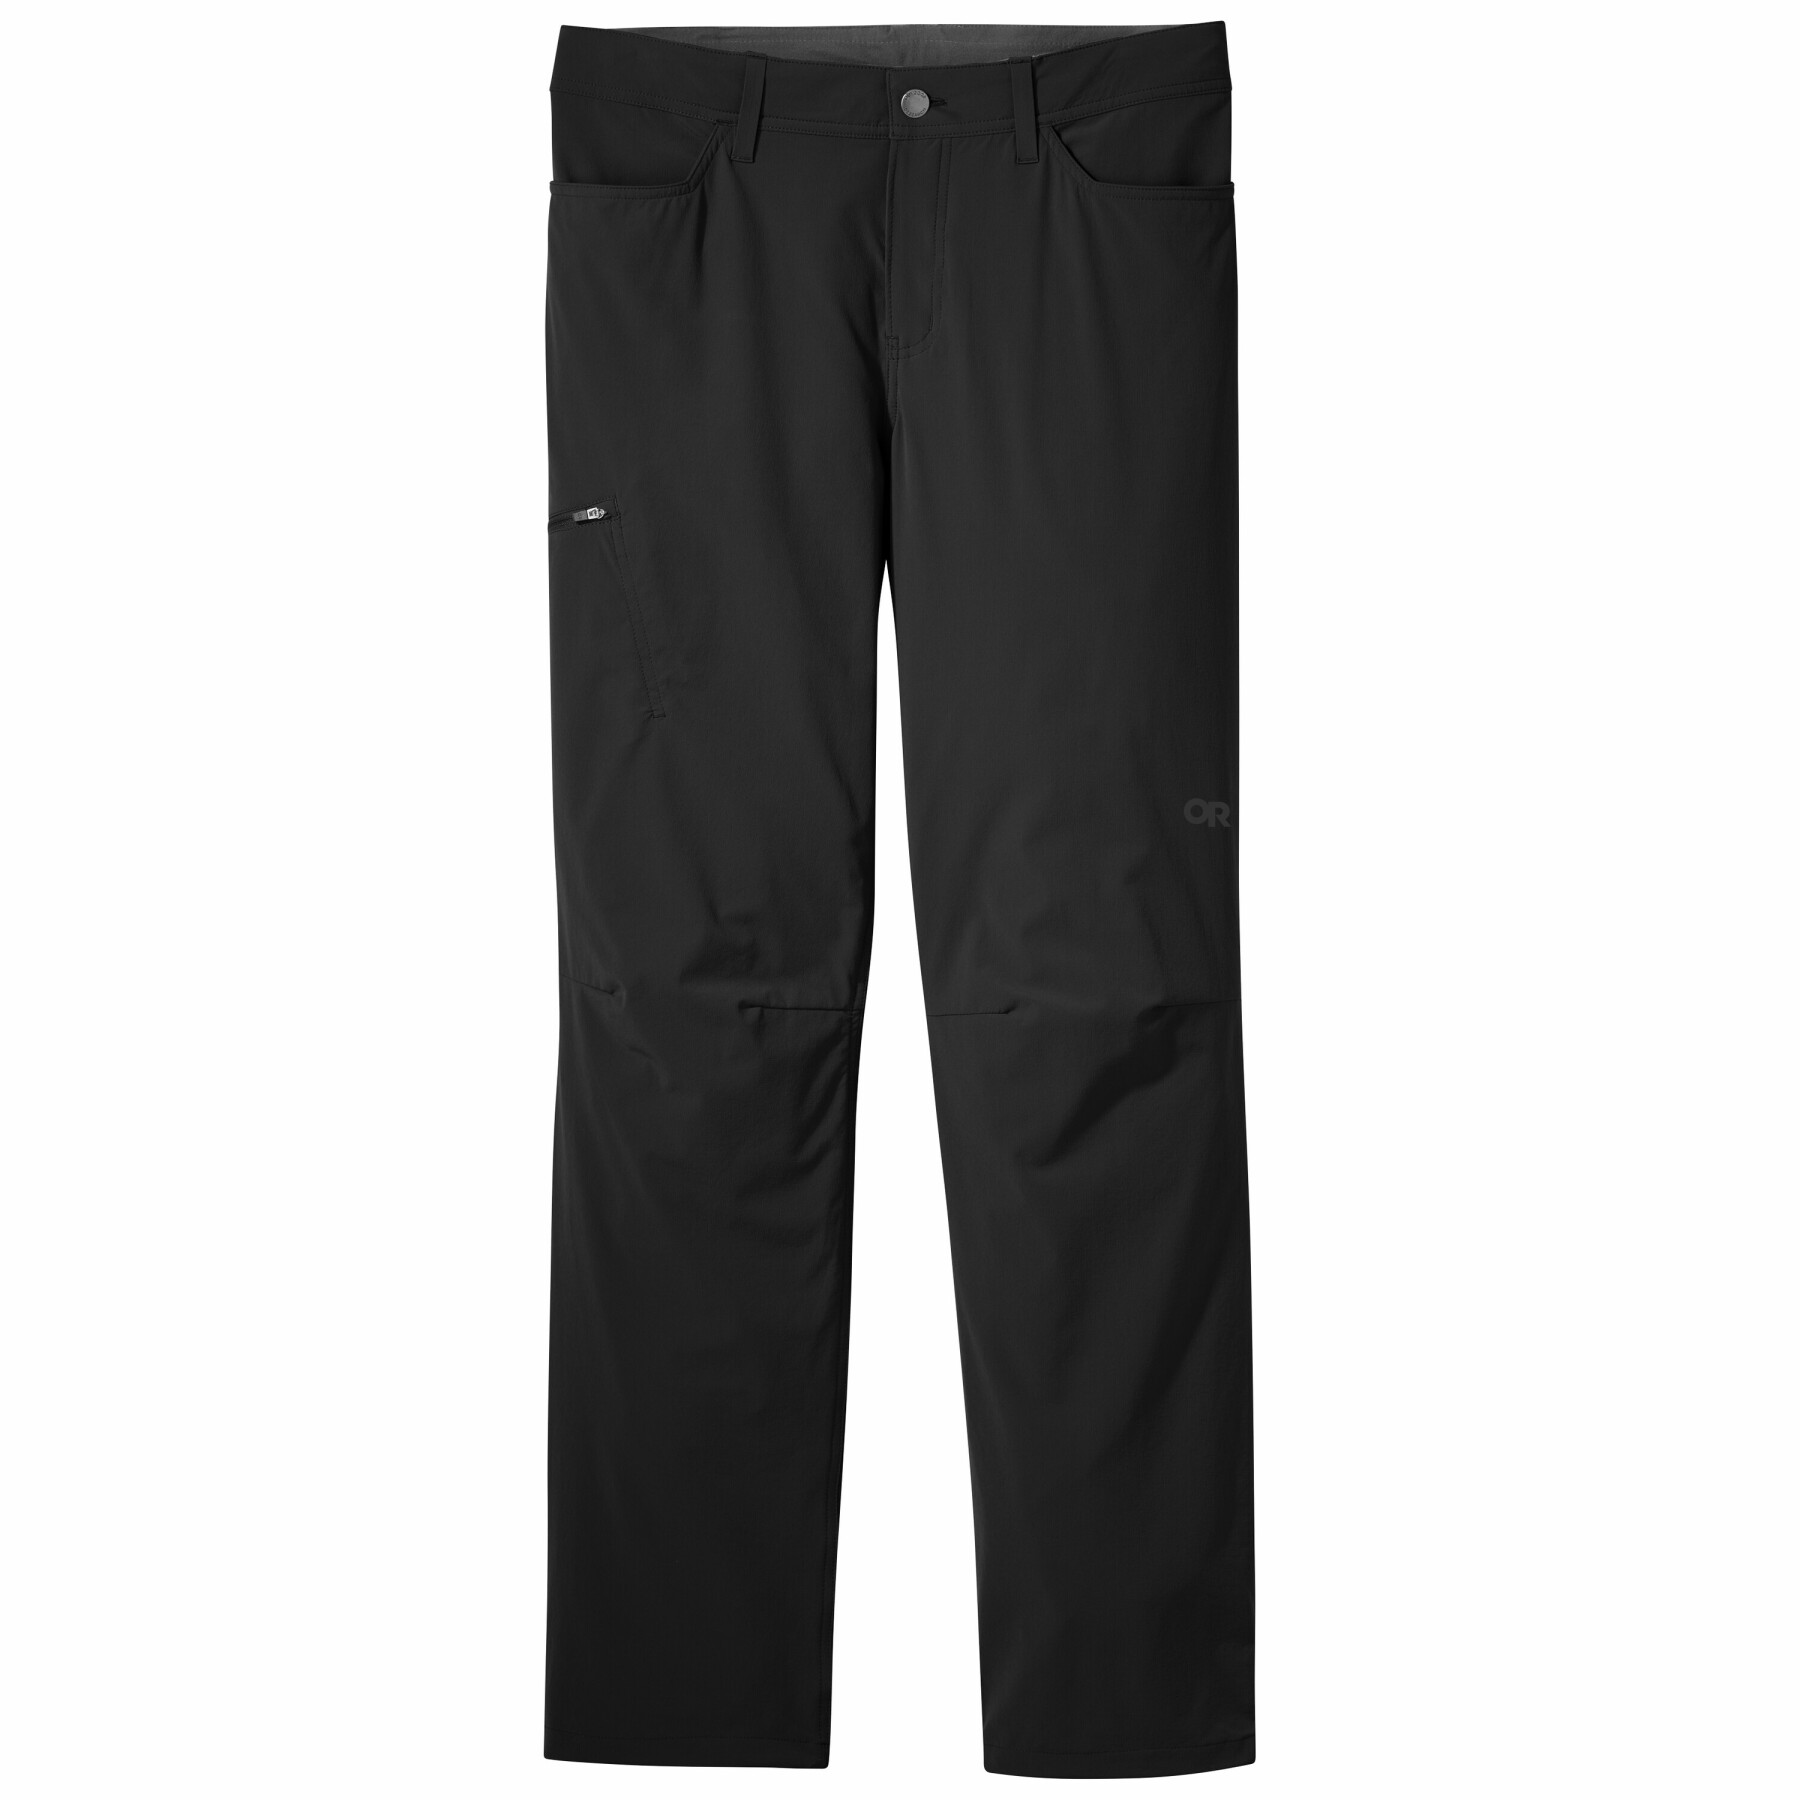 Pants Outdoor Research Ferrosi 36"